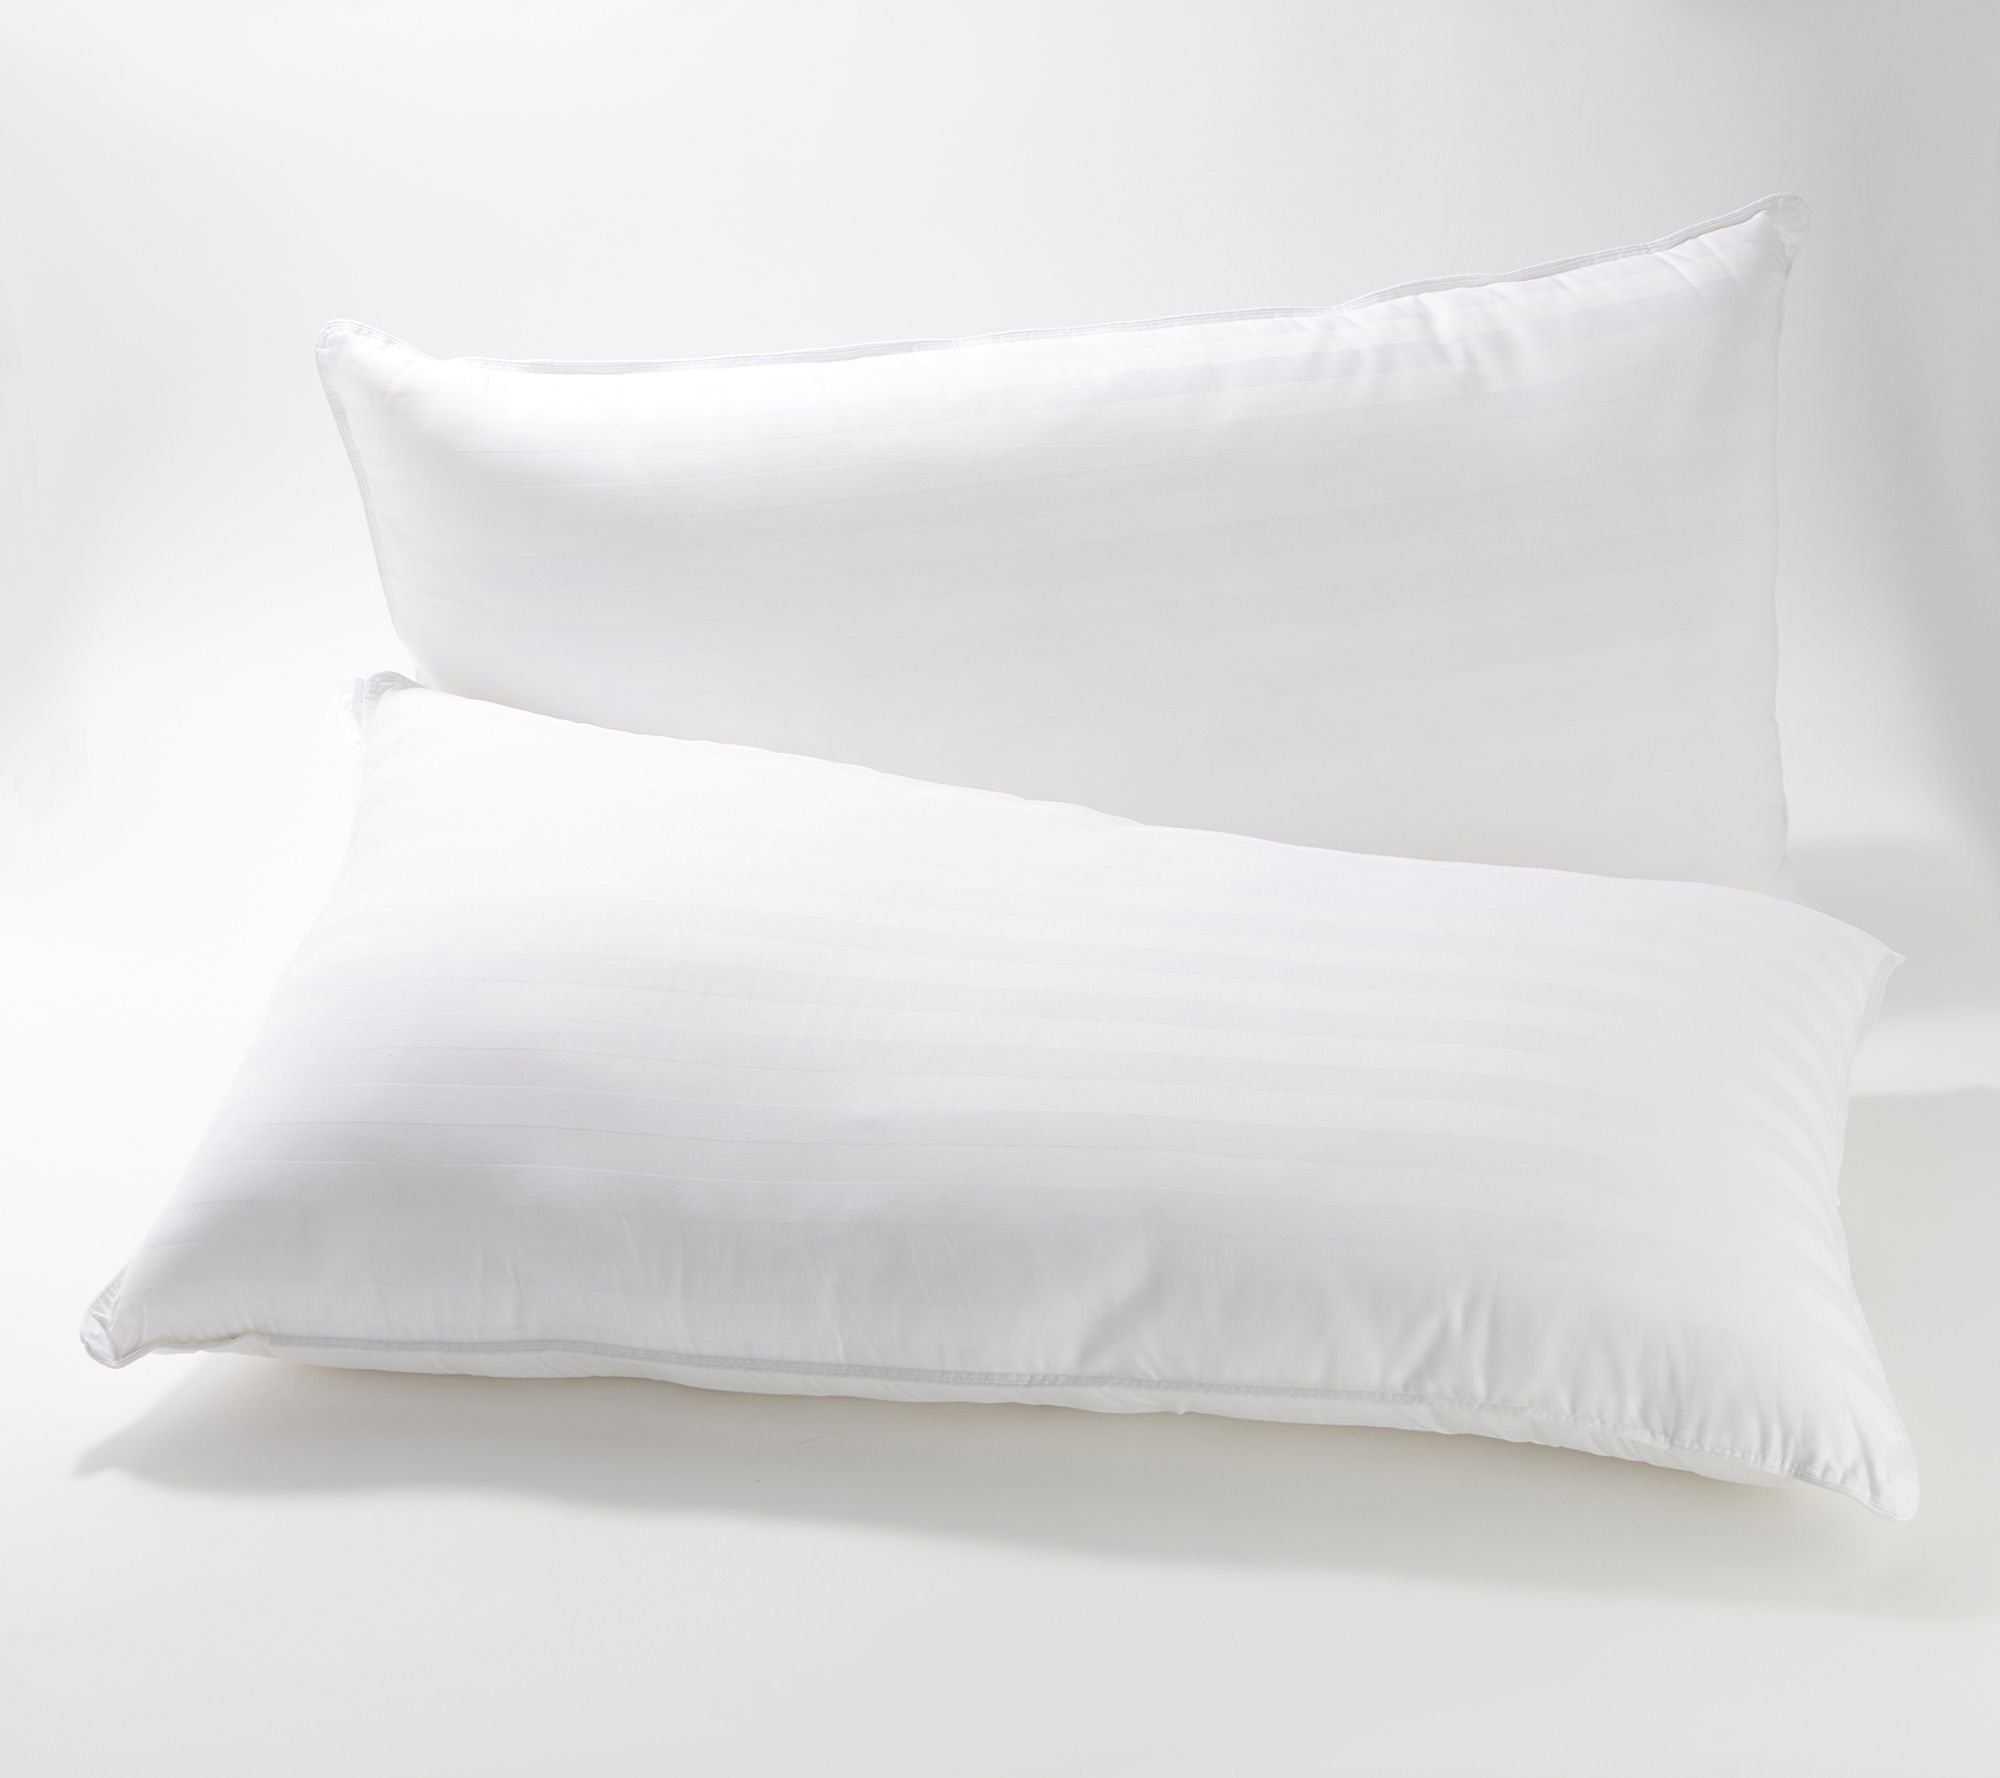 Northern Nights Set of 2 King Hotel Luxury Plush or Firm Gel Pillows | QVC